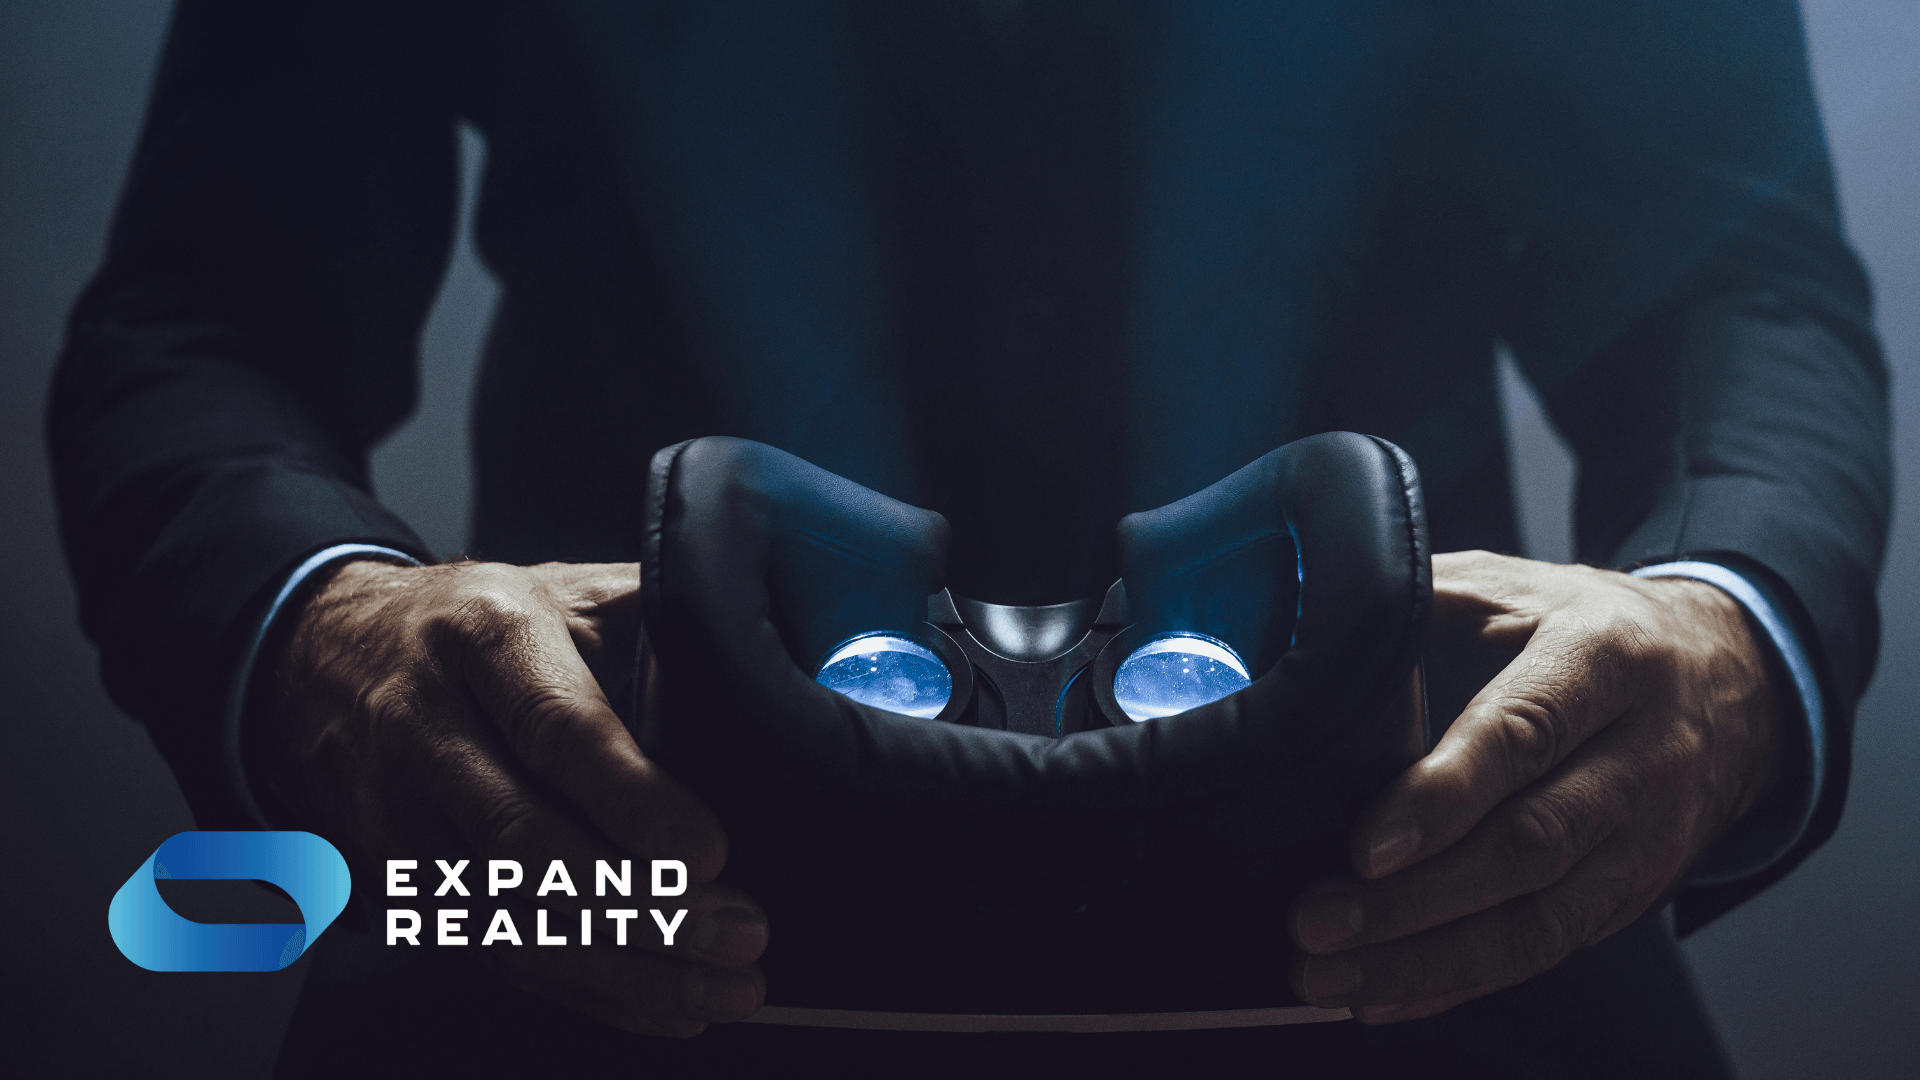 Development giant Unity is investing heavily in augmented reality (AR). But why? Get the answers here, and learn why the future's bright for AR.